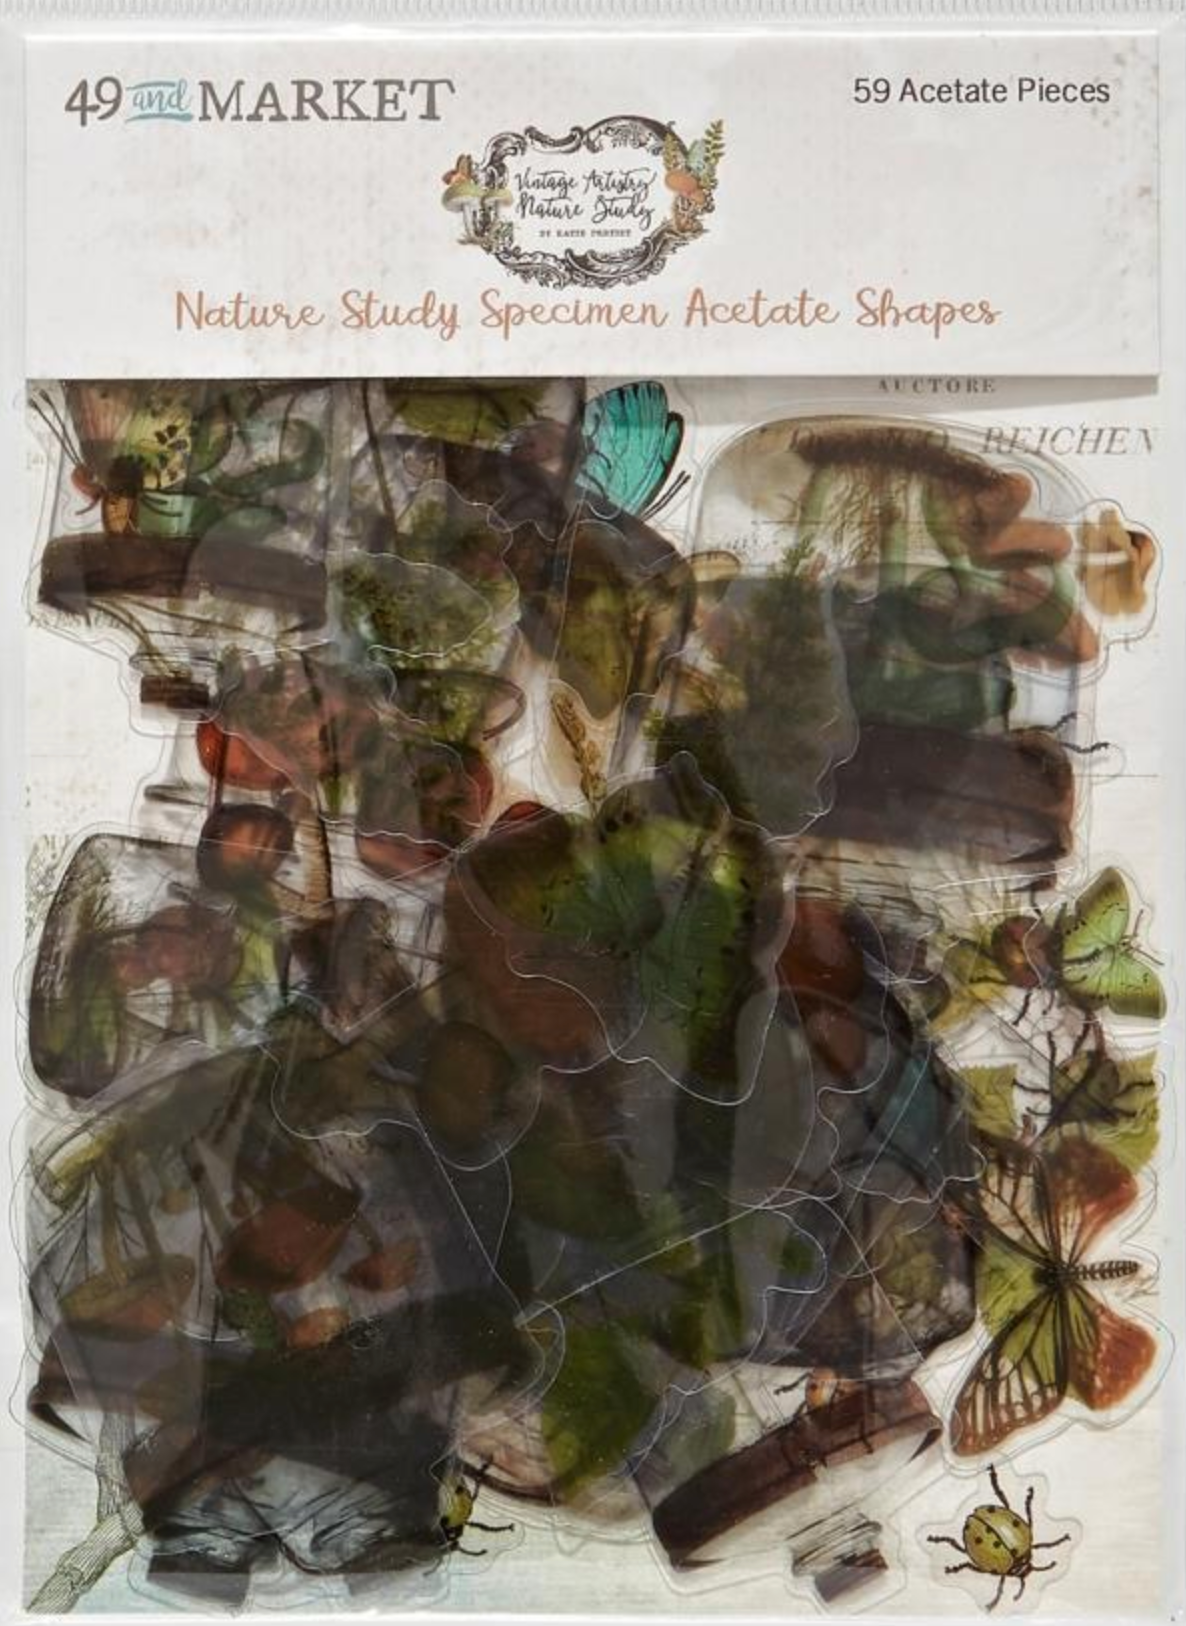 49 and Market - Nature Study Collection - Acetate Shapes - Specimen